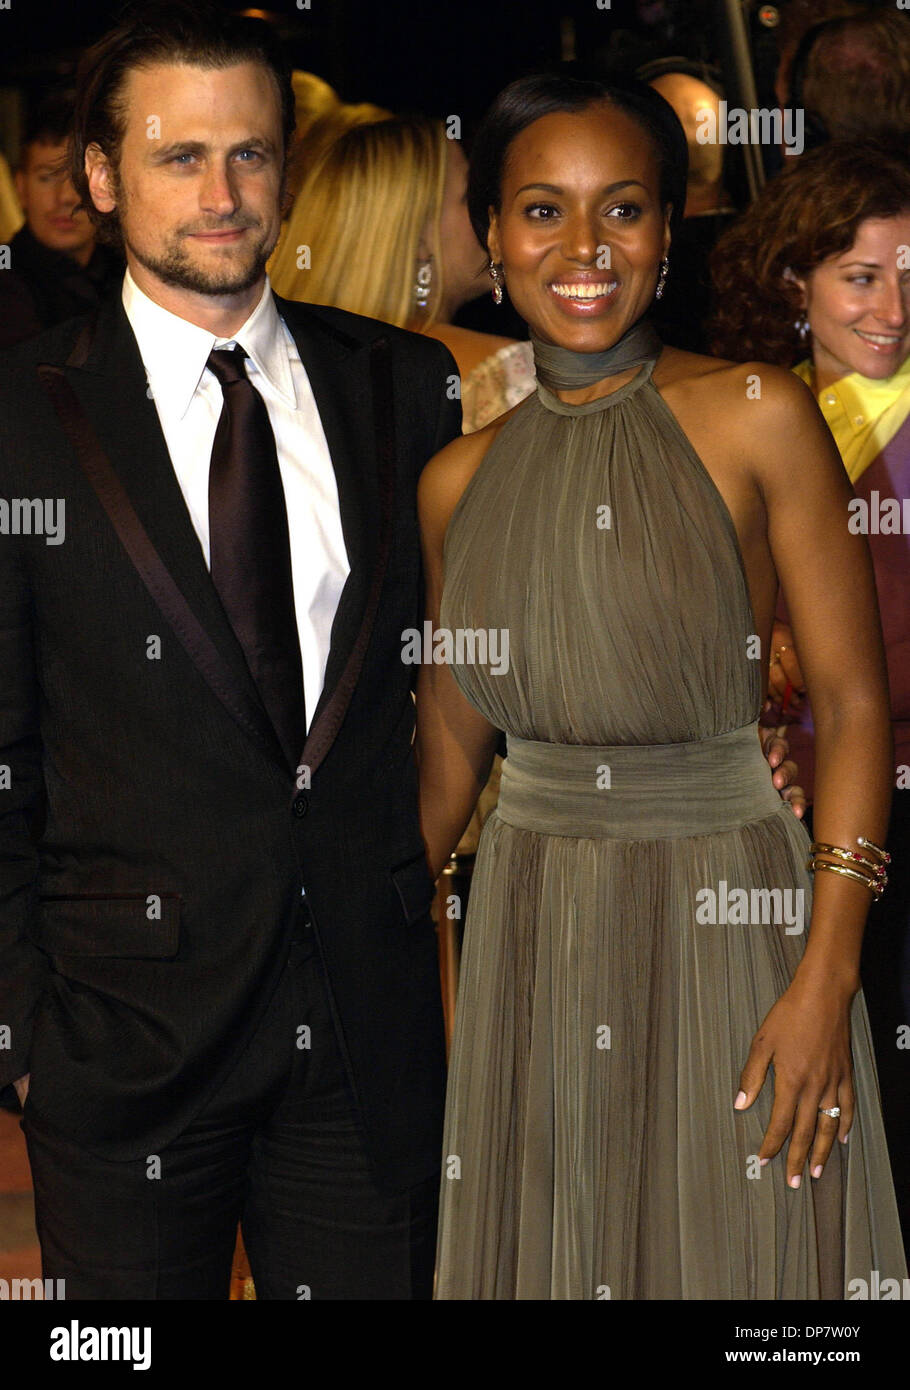 Mar 05, 2006; West Hollywood, CA, USA; DAVID MOSCOW and KERRY WASHINGTON at the Vanity Fair Dinner And After Party at Mortons celebrating the 78th Academy Award in West Hollywood, California. Mandatory Credit: Photo by Rich Schmitt/ZUMA Press. (©) Copyright 2006 by Rich Schmitt Stock Photo